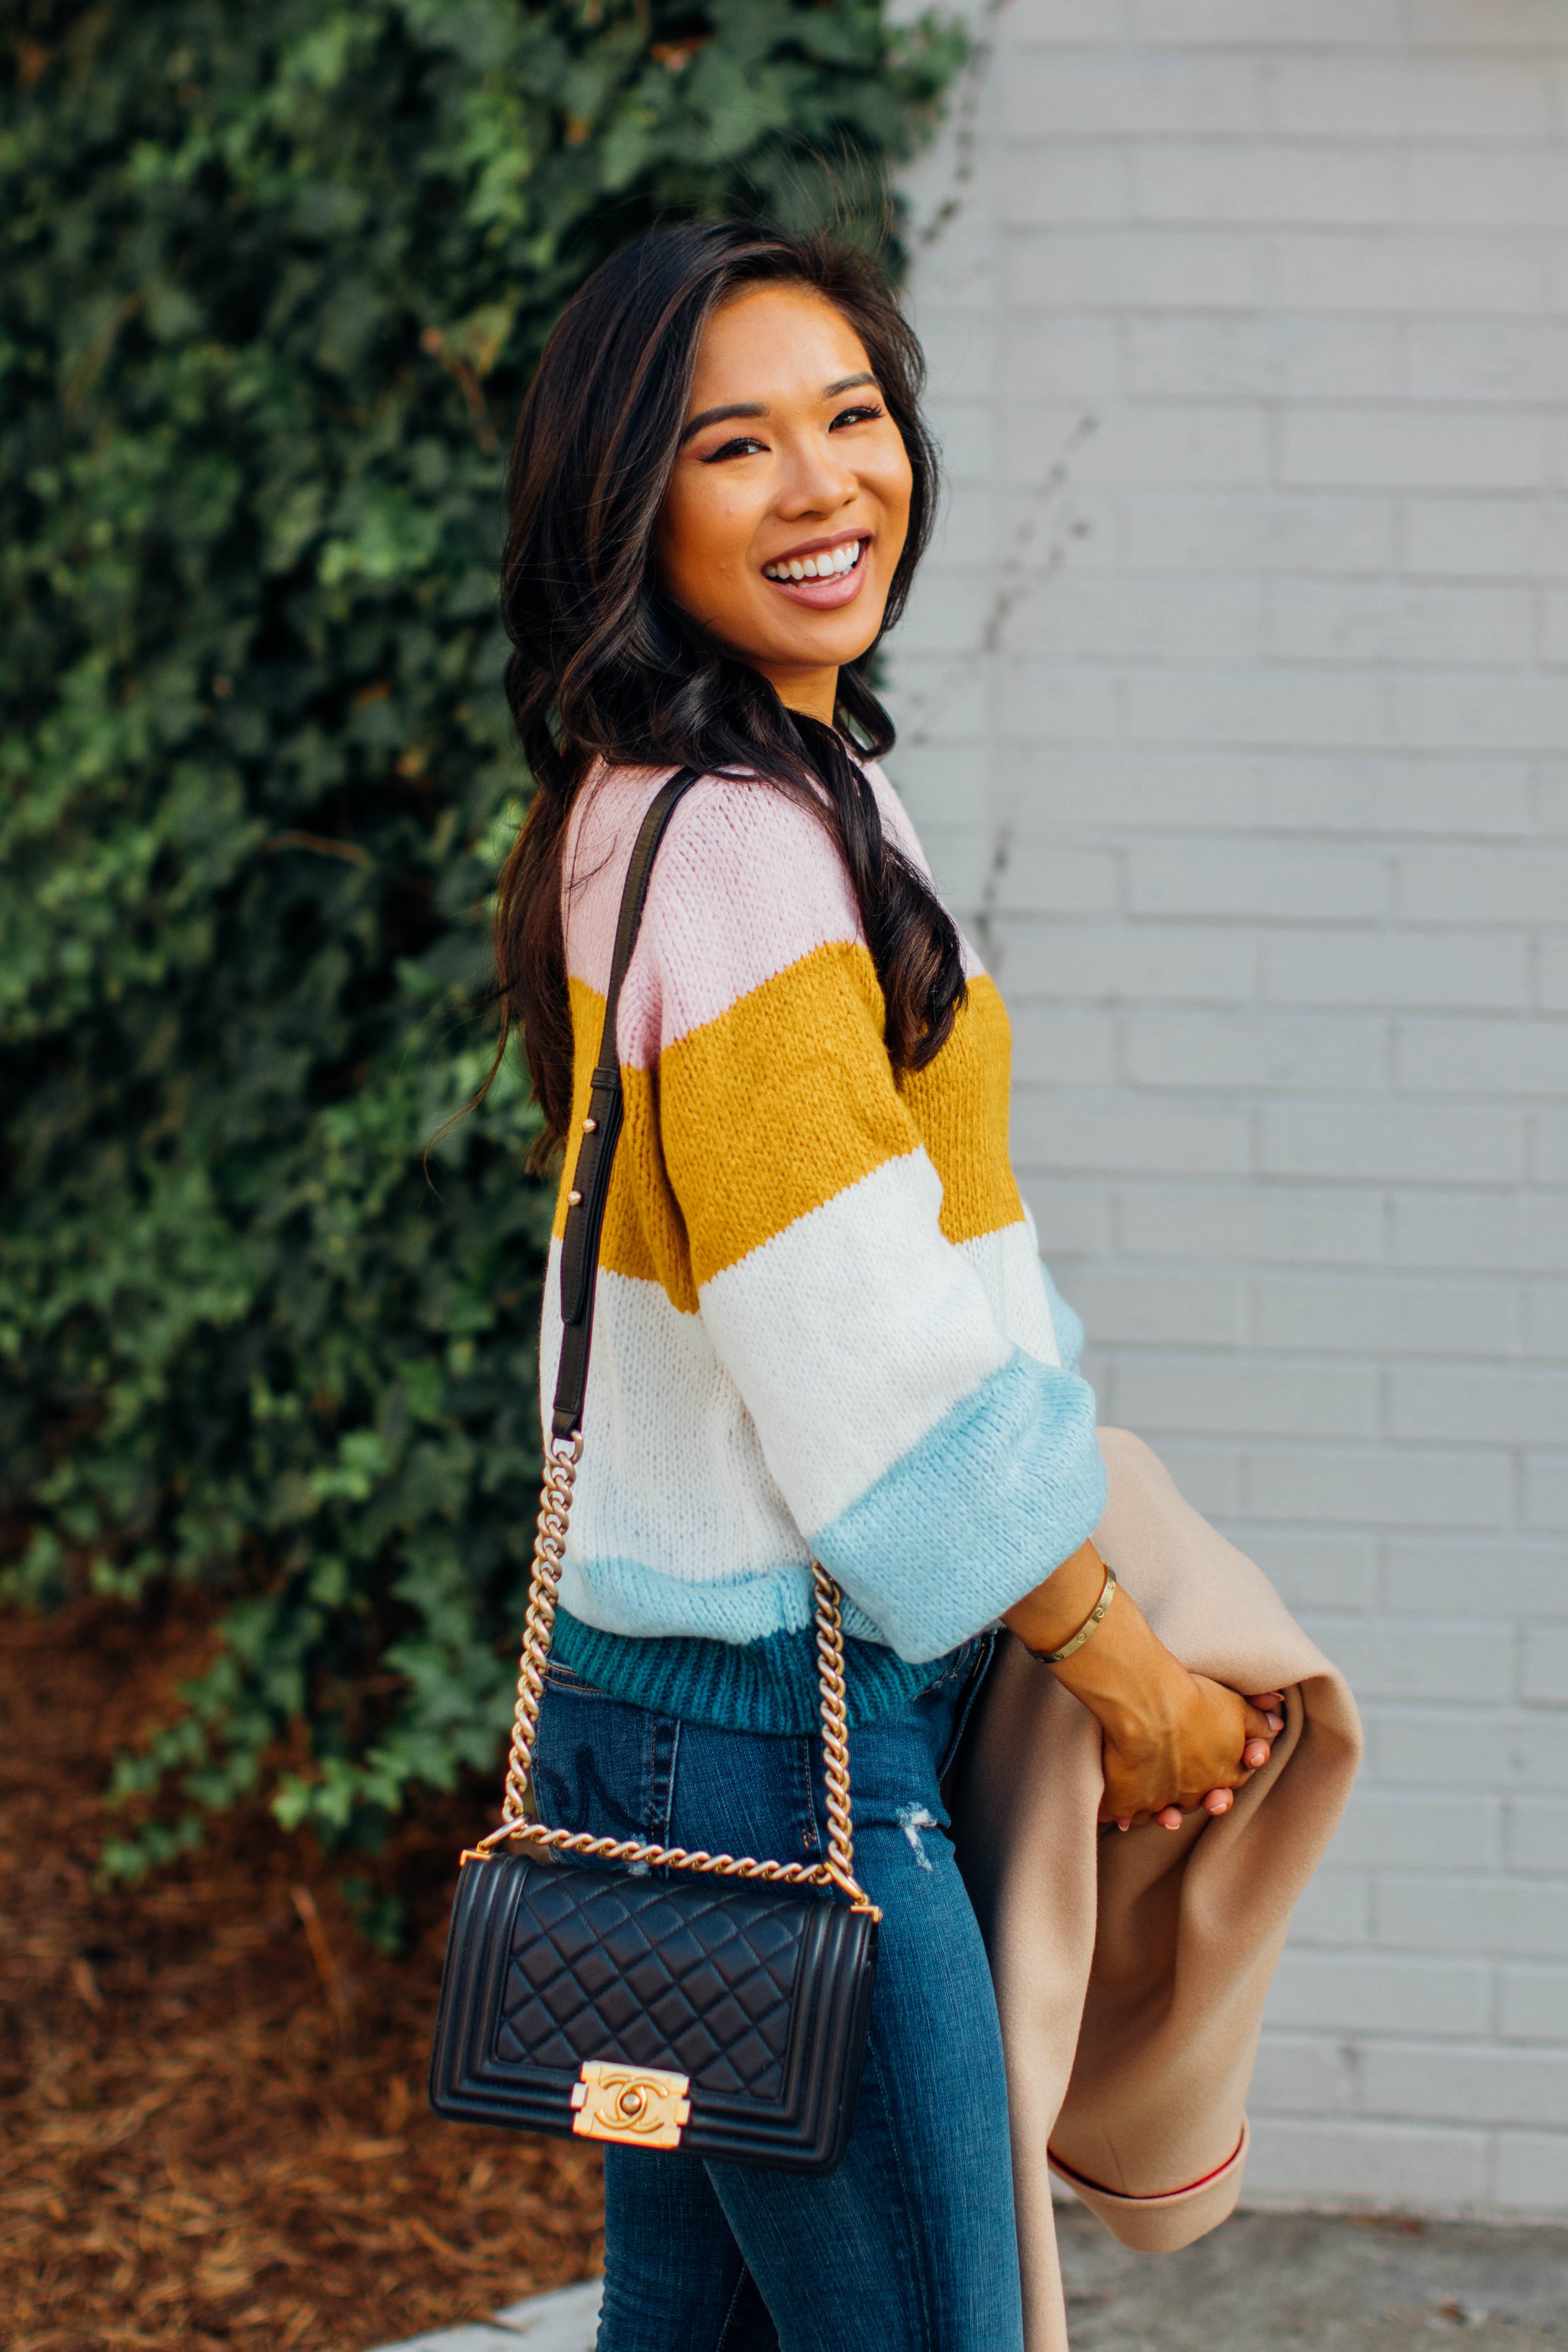 Blogger Hoang-Kim wears a striped transition sweater with a Chanel bag for fall